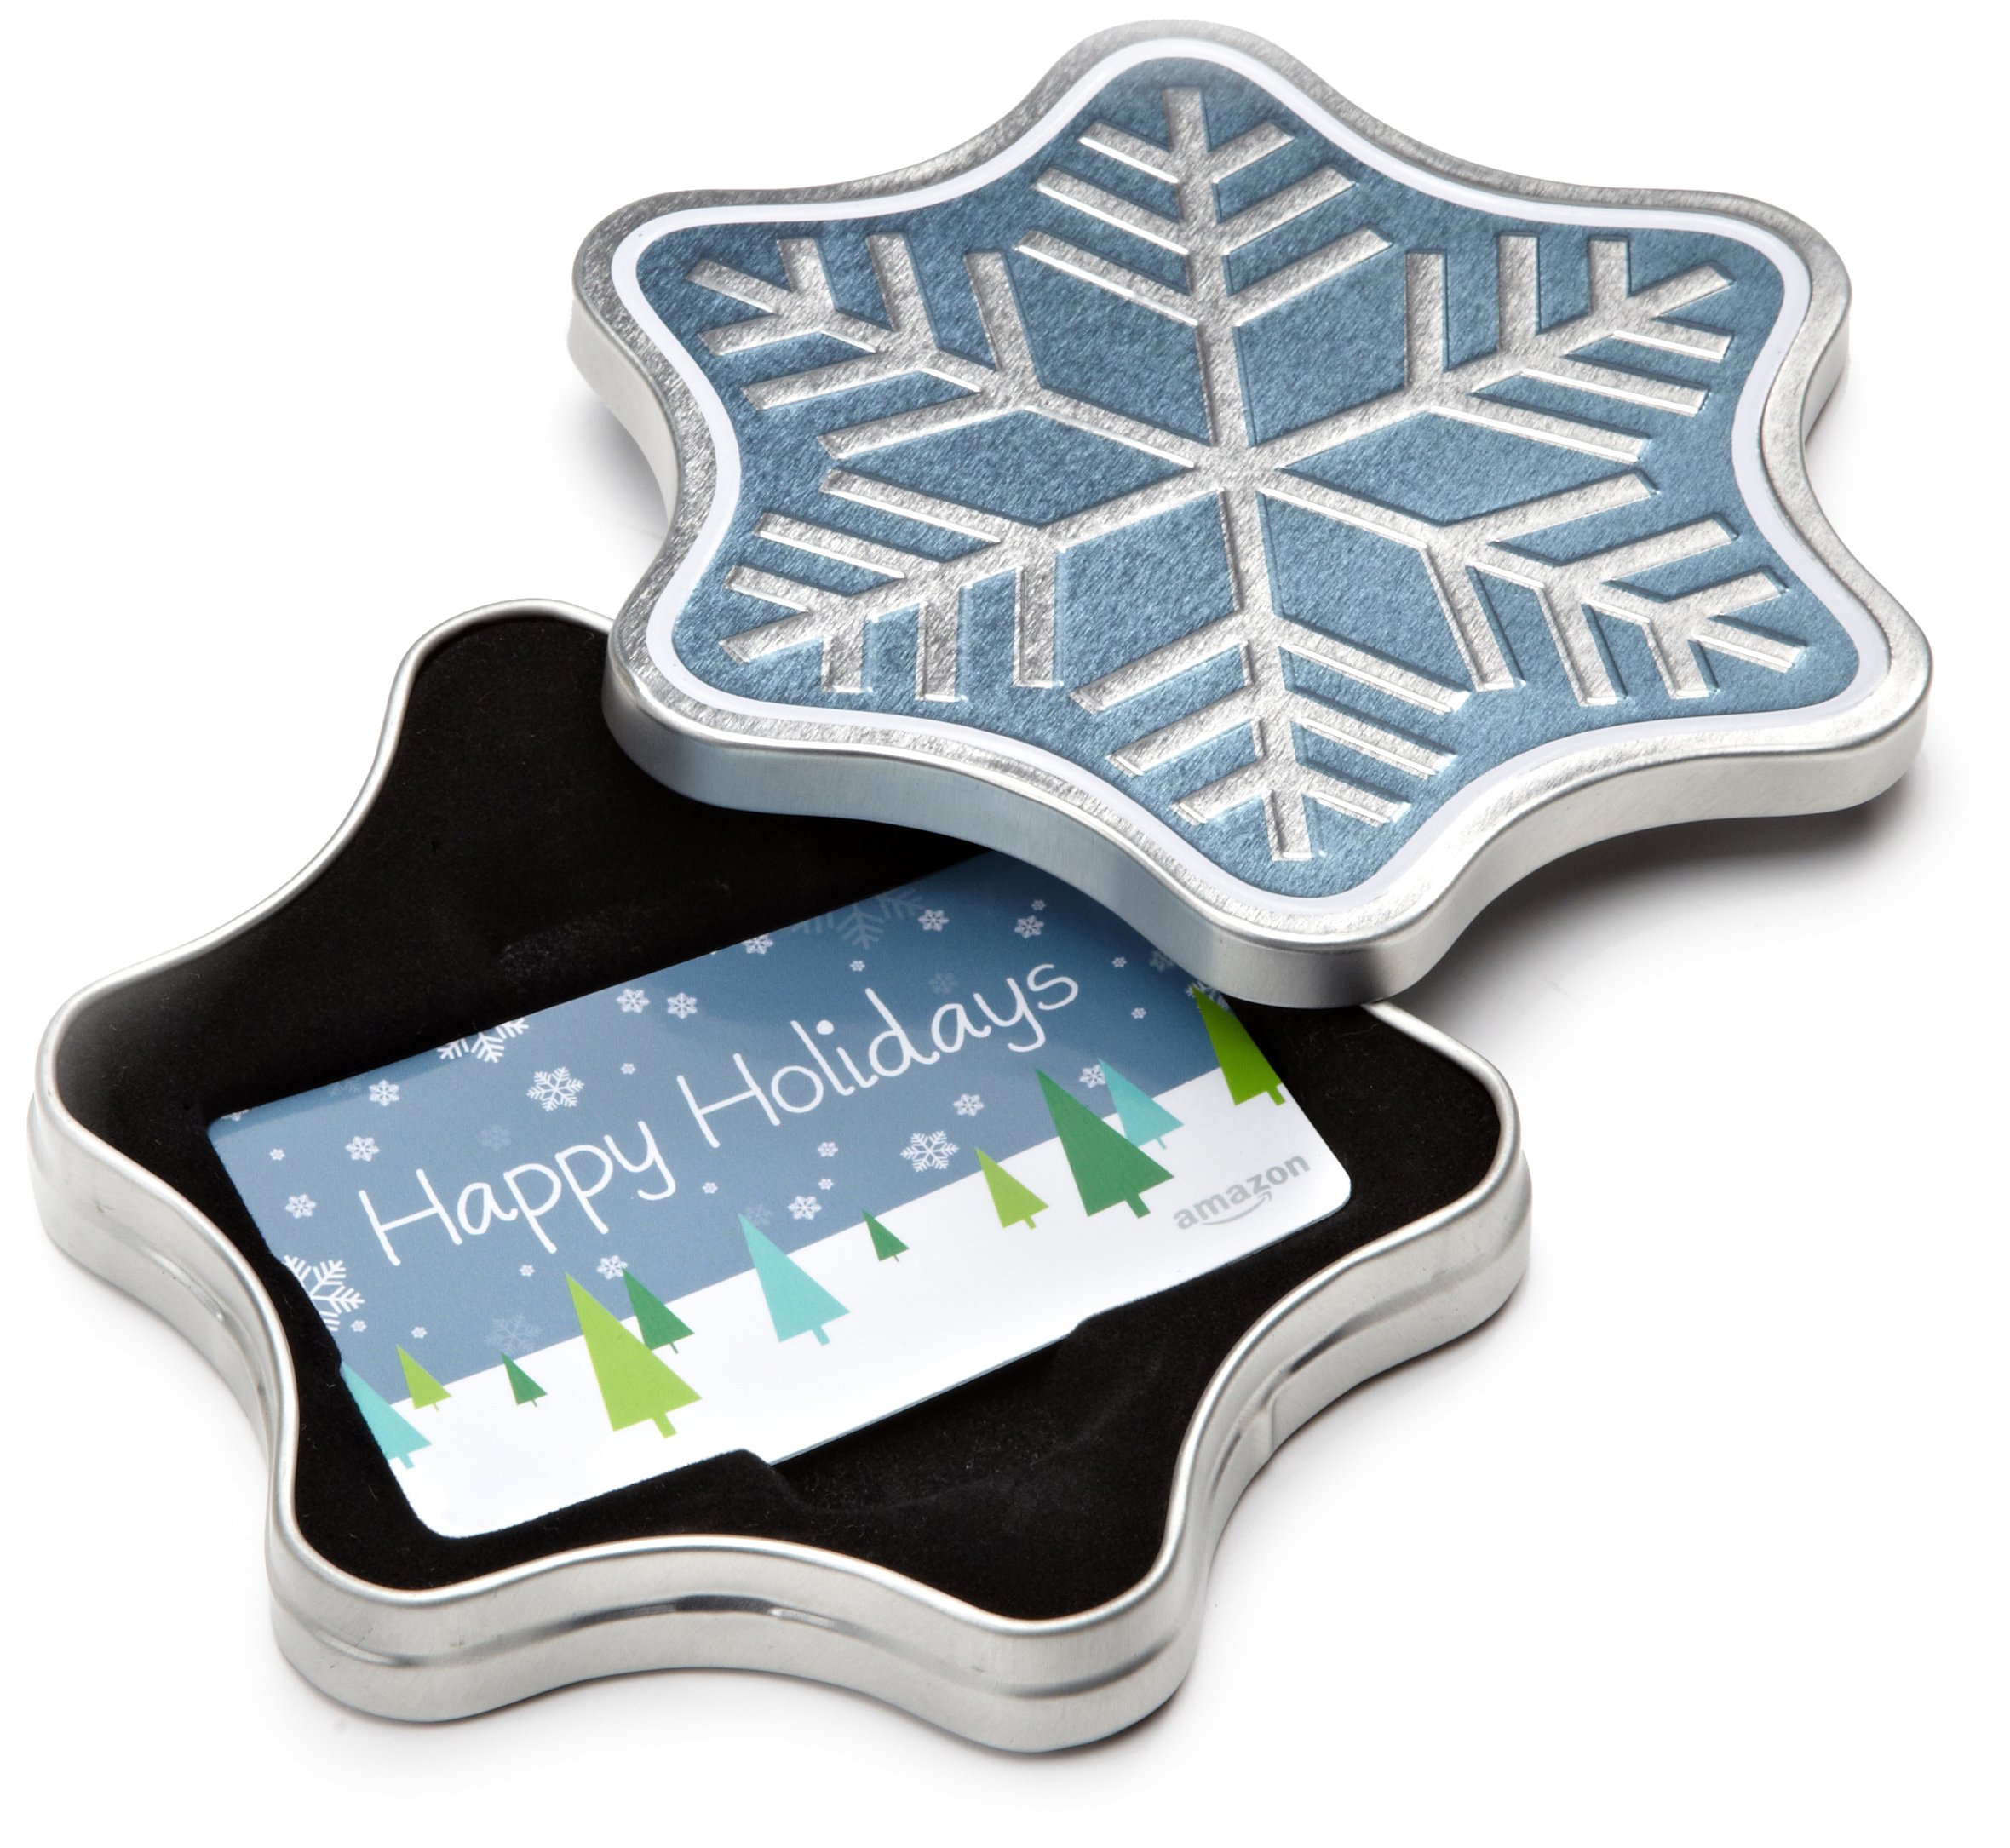 Book Cover Amazon.com Gift Card in a Holiday Gift Box (Various Designs) 0 Snowflake Tin